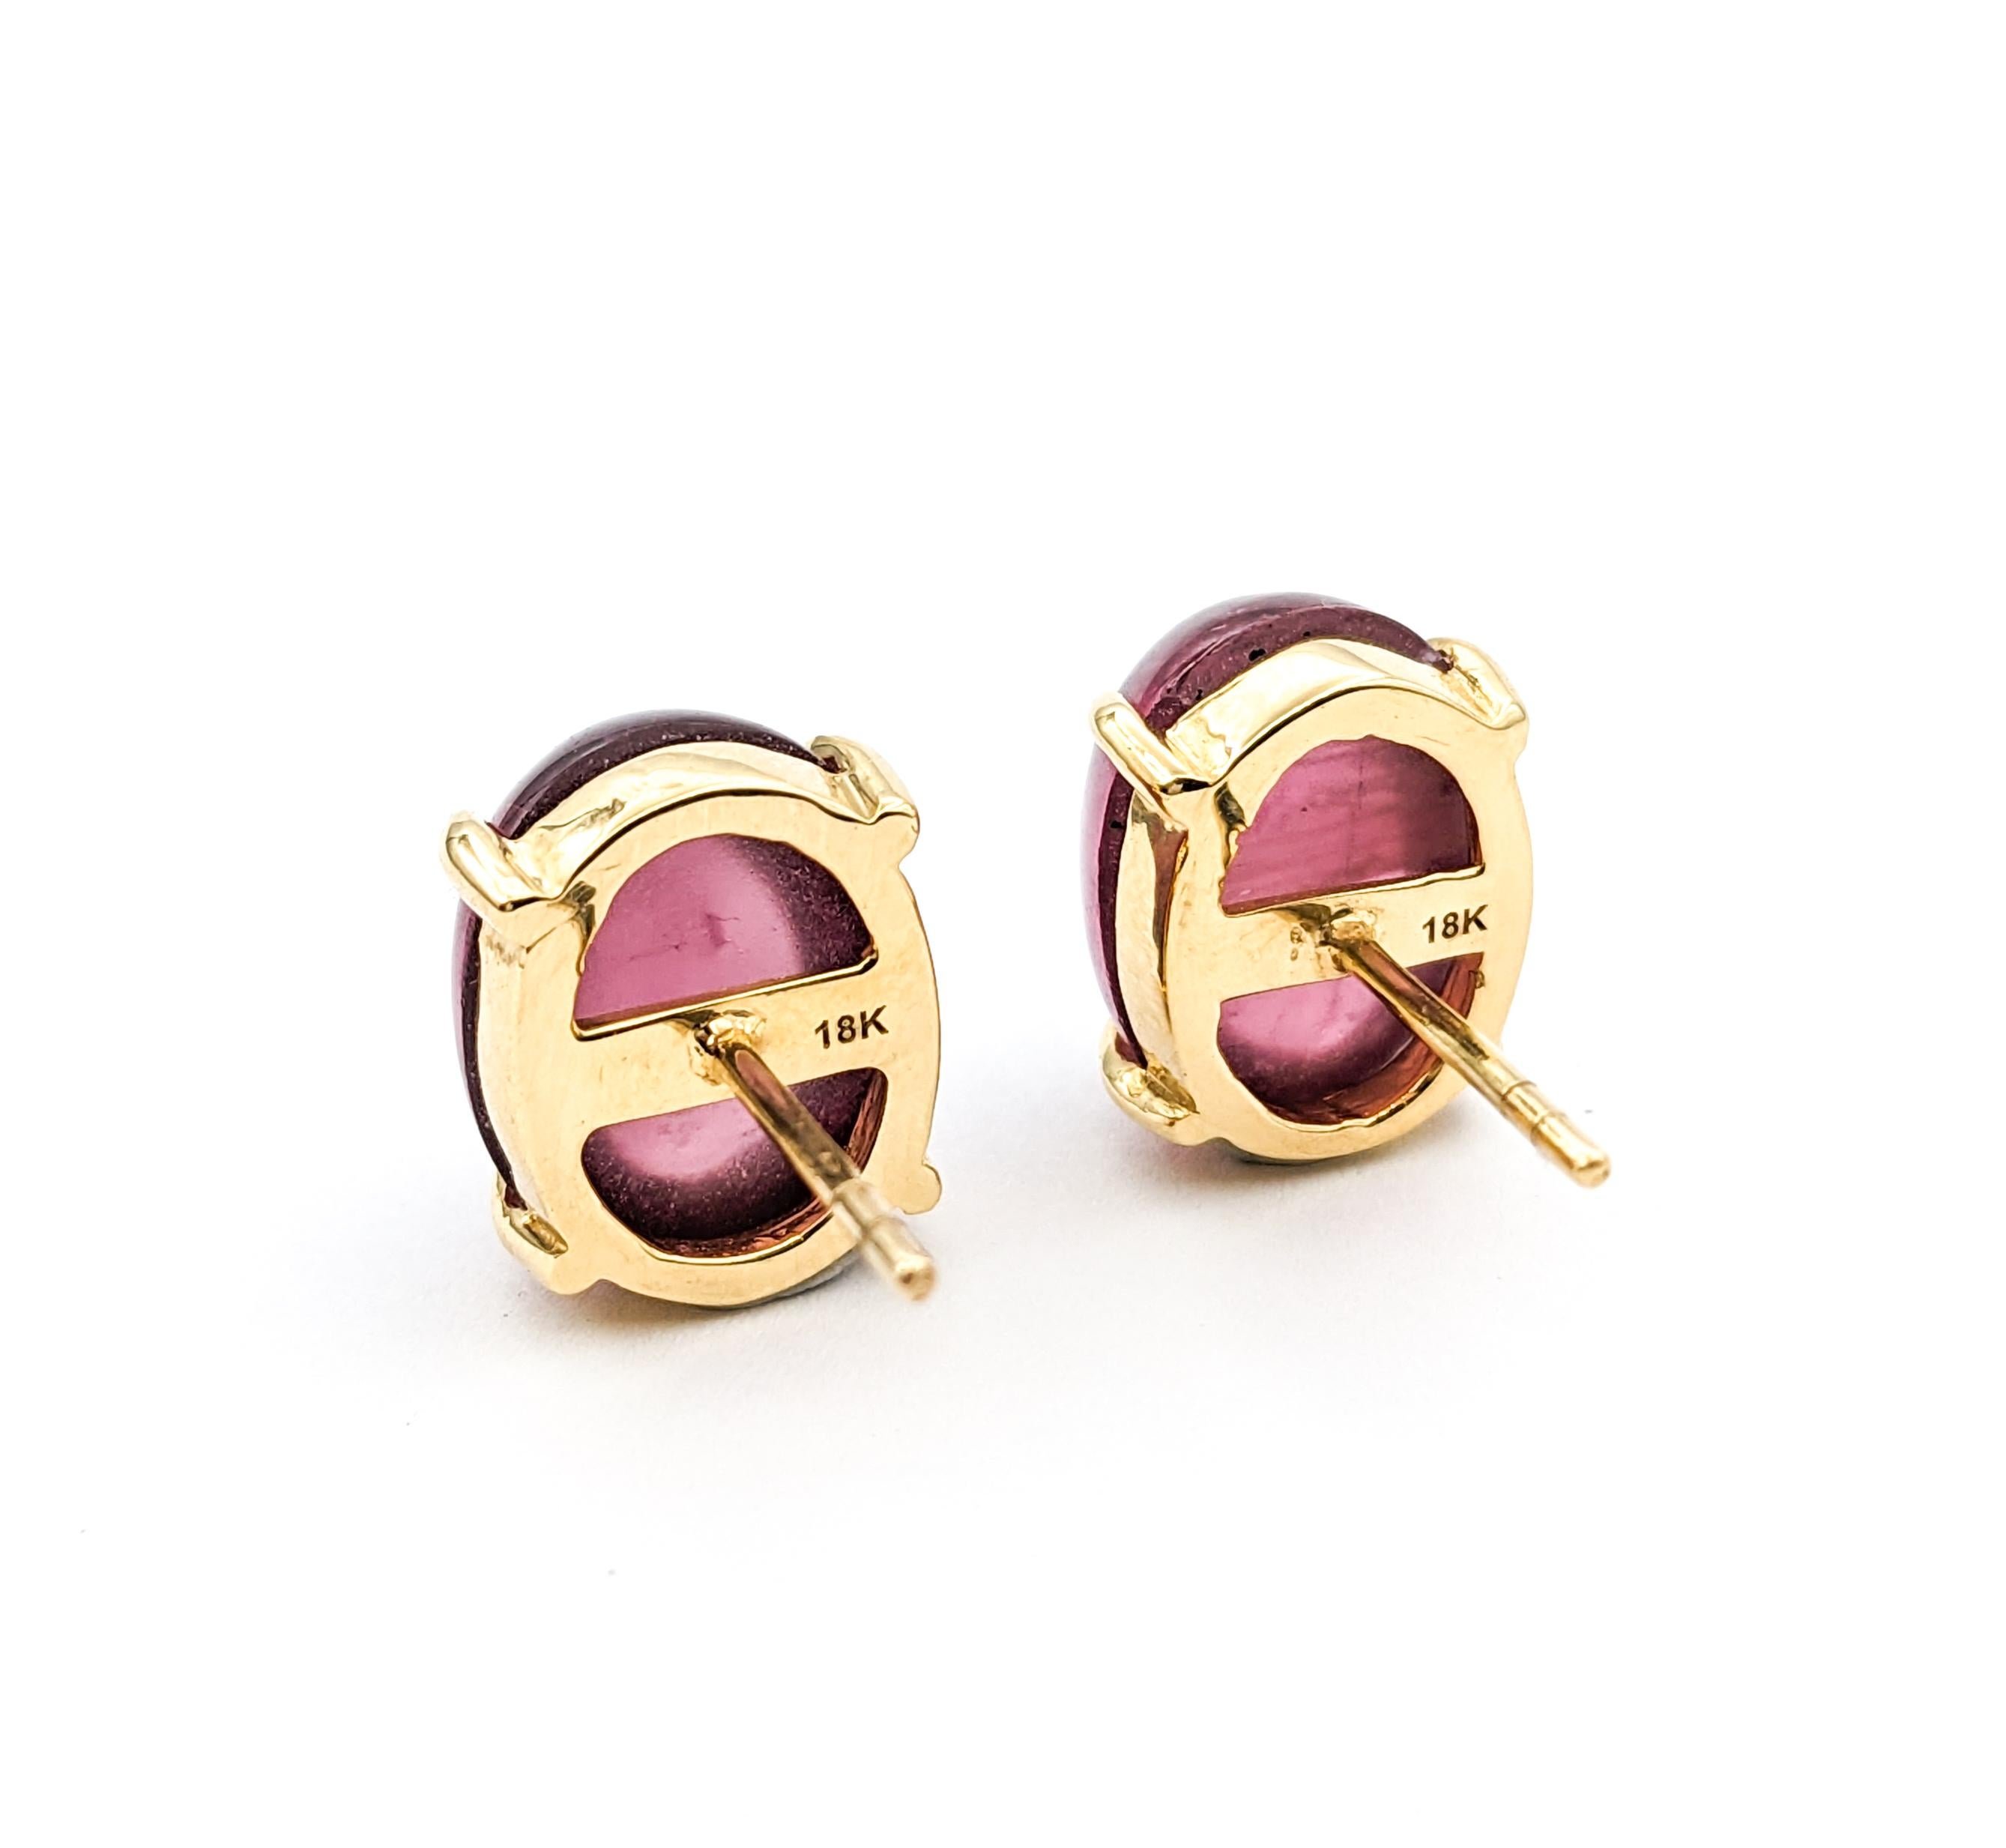 12ctw Pink Tourmaline Earrings In Yellow Gold For Sale 2